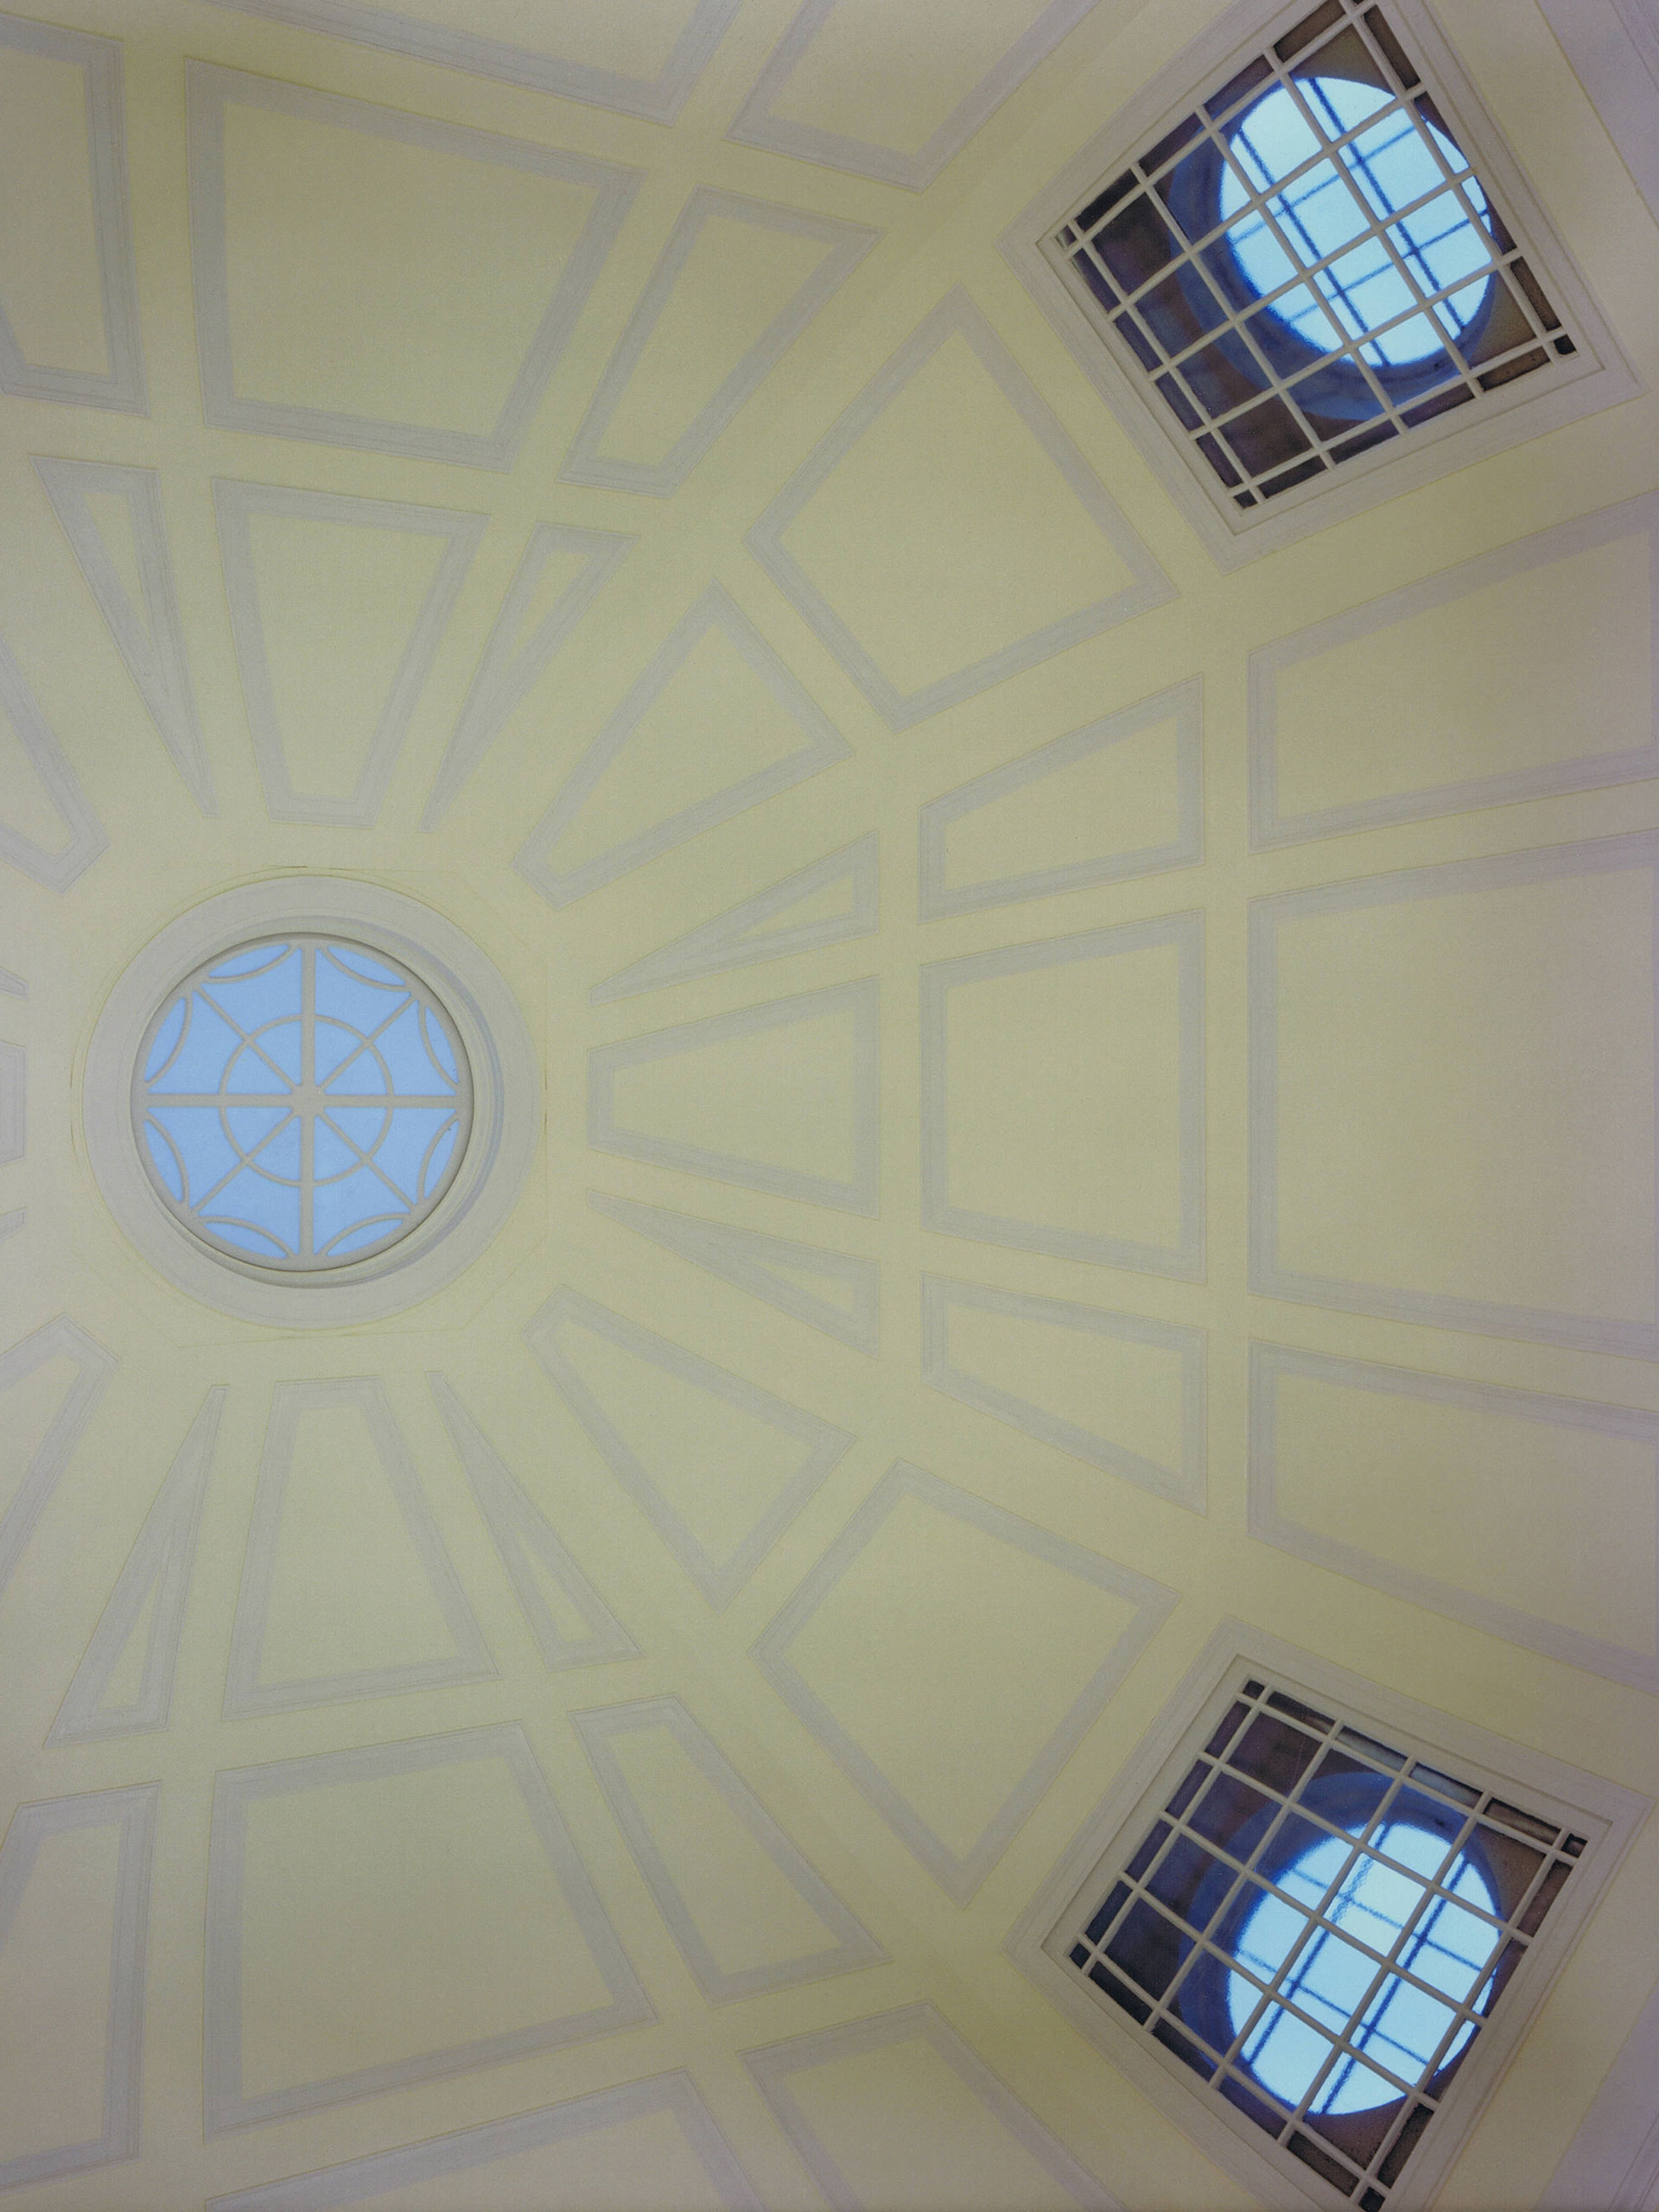 The ceiling of the Brooks Hall rotunda. The dome was closed off in 1956 with a dropped ceiling. This renovation restored the dome to it’s original beauty, allowing it to flood the rotunda with light.